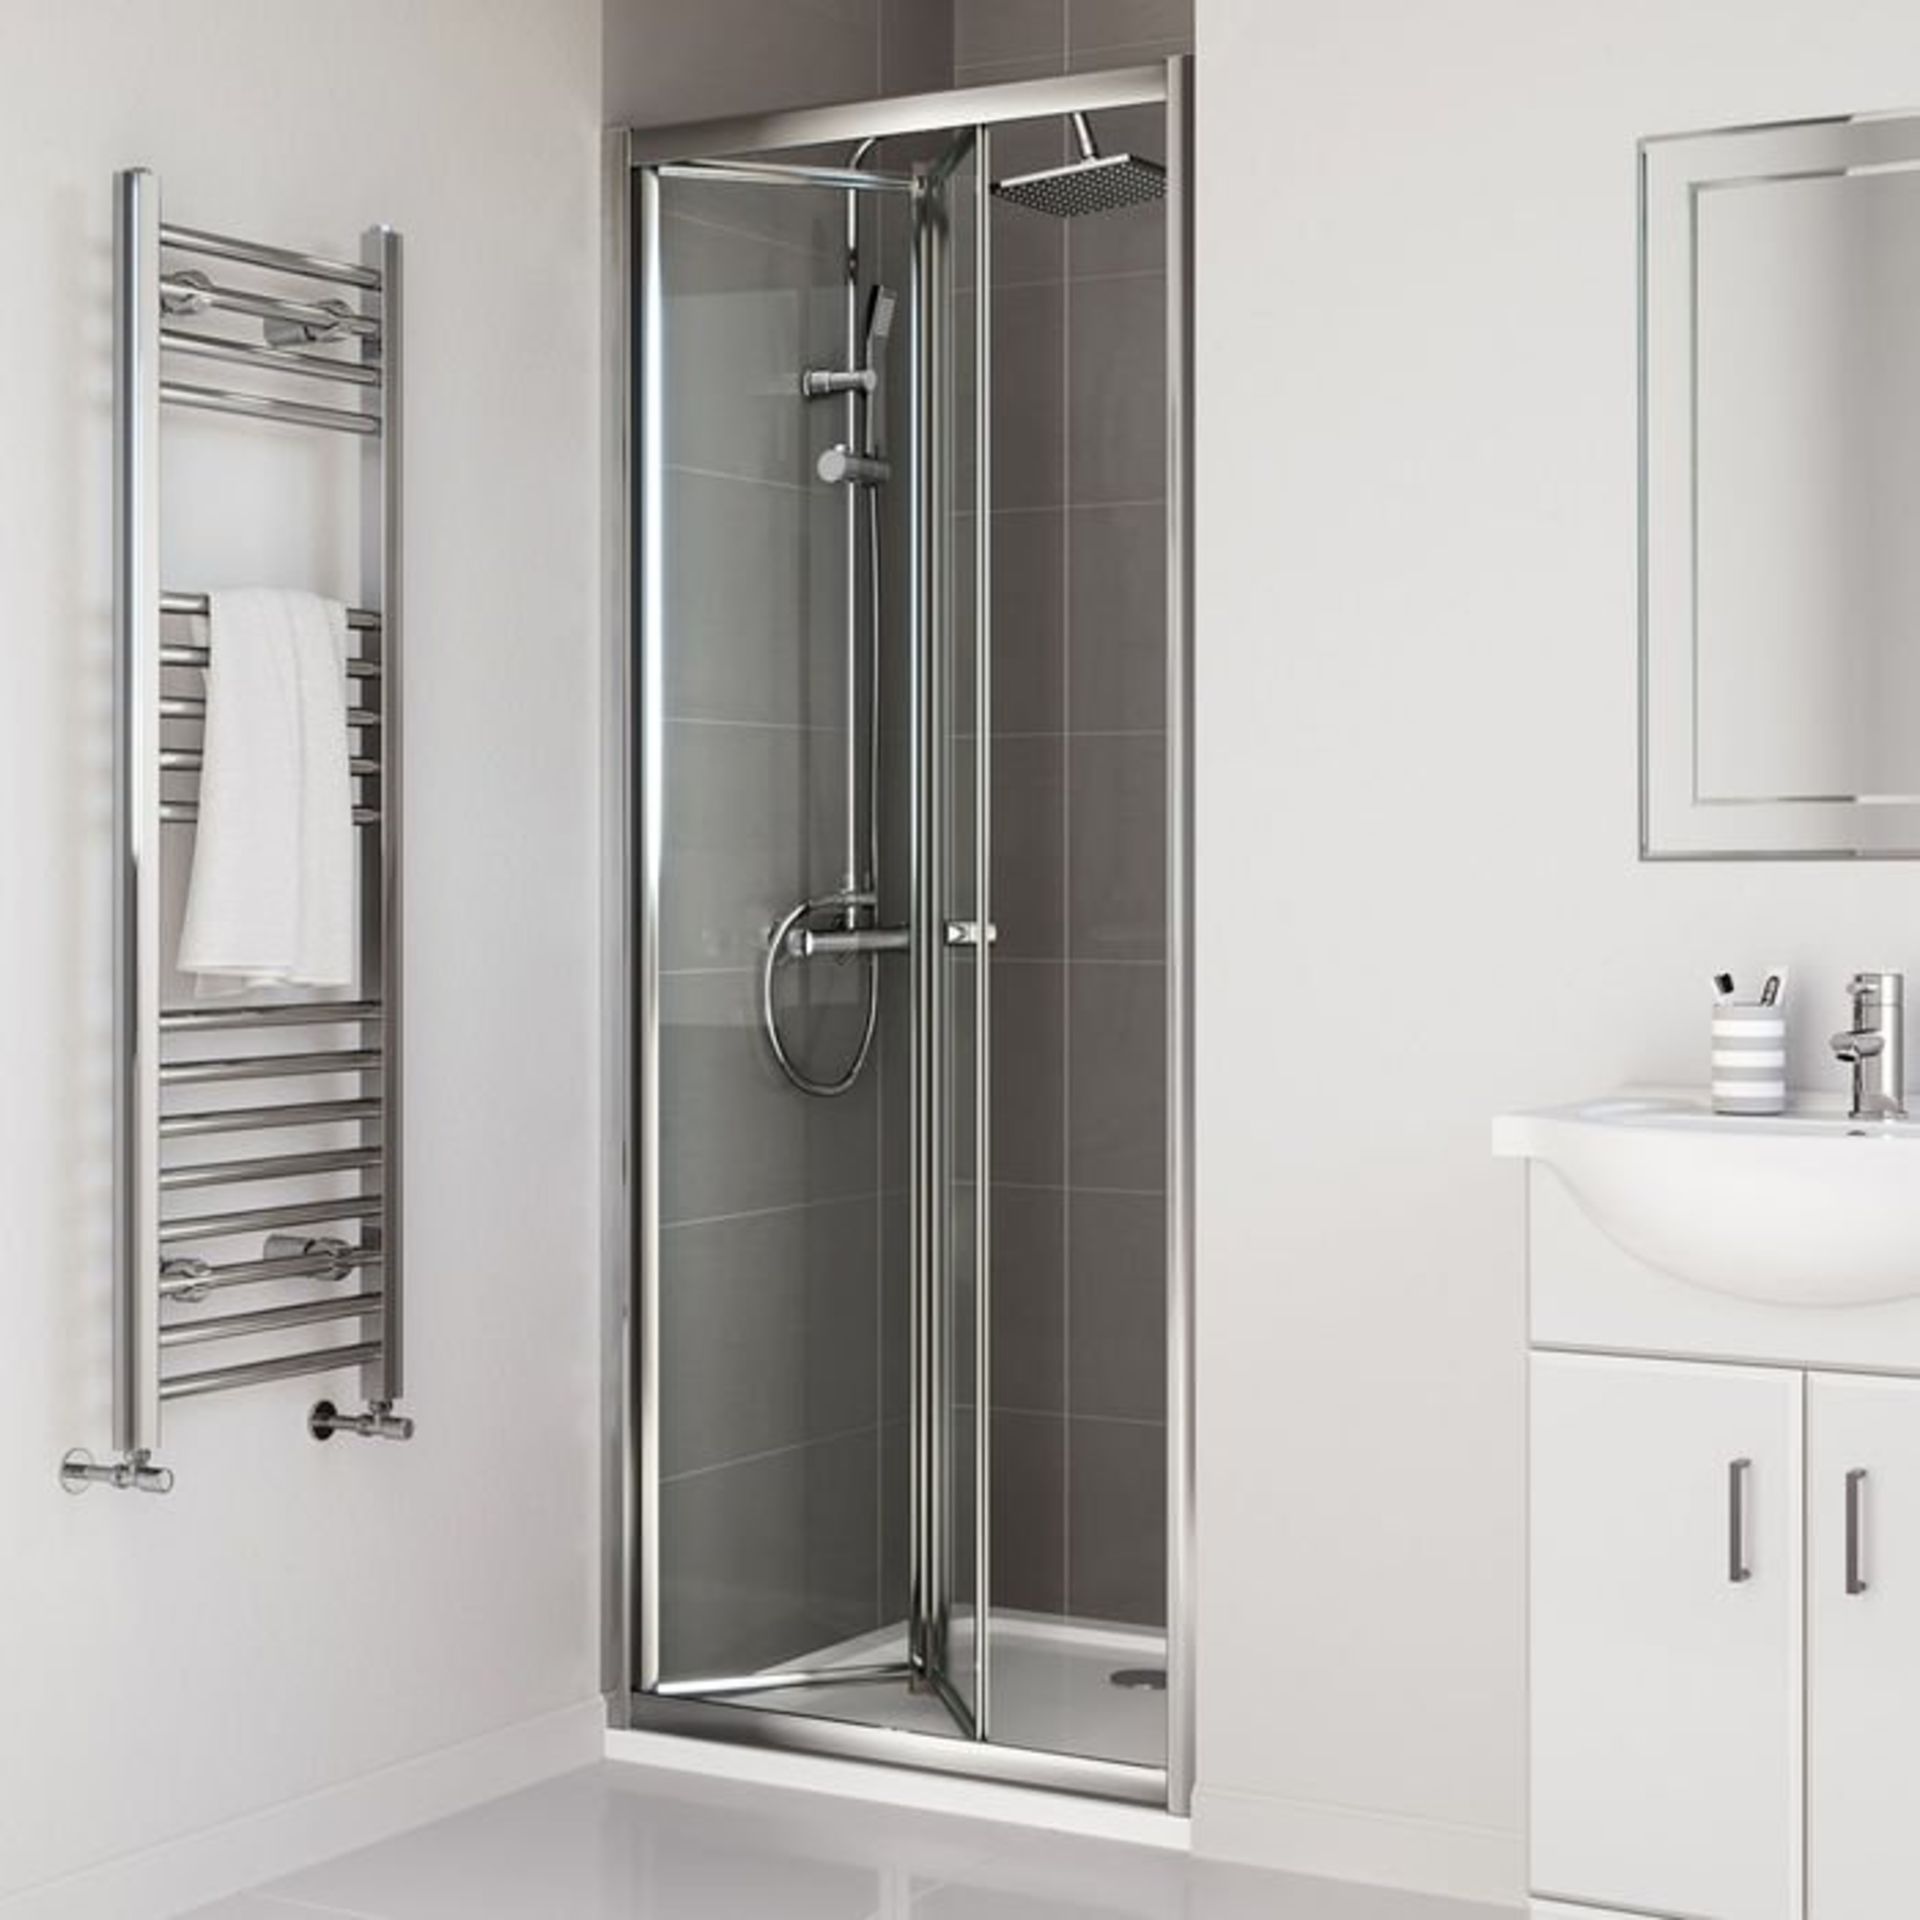 (G192) 900mm - Elements Bi Fold Shower Door. RRP £299.99. 4mm Safety Glass Fully waterproof tested - Image 2 of 3